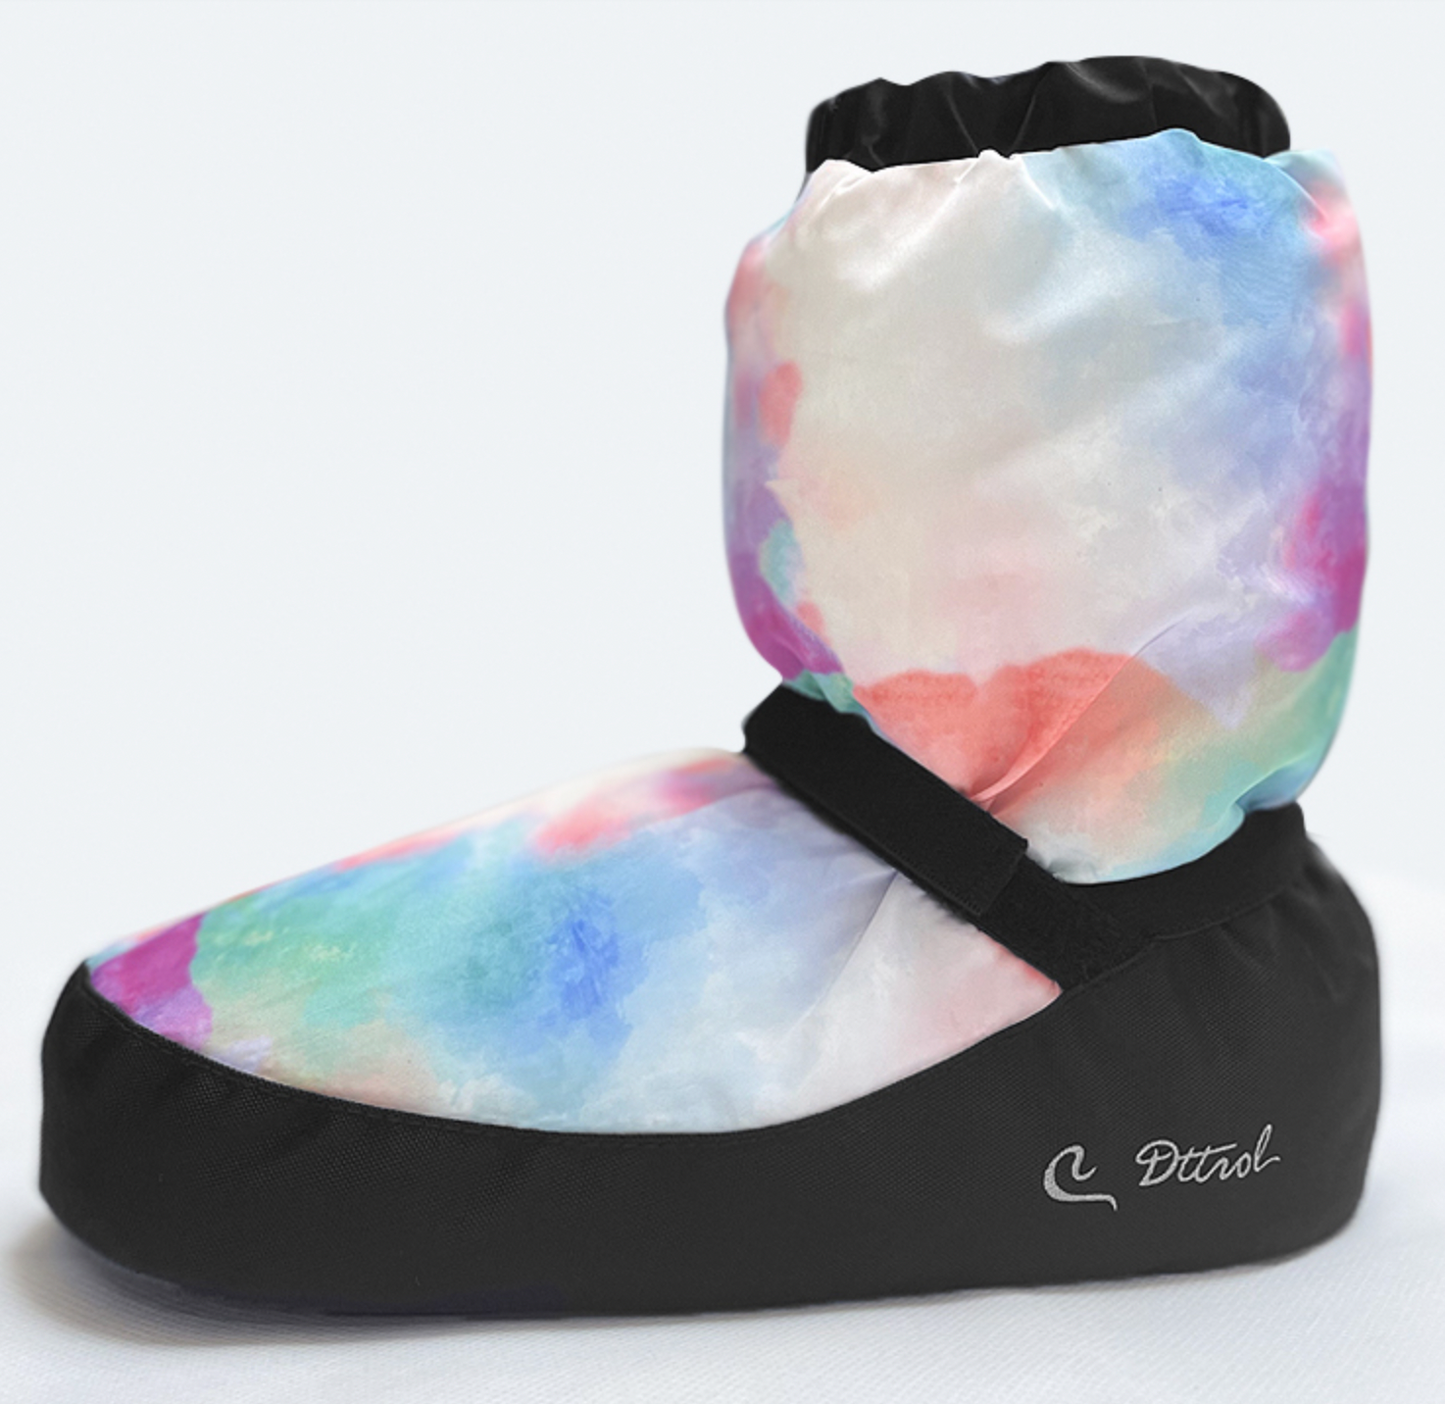 Warm up bootie in Rainbow colours from The Collective Dancewear